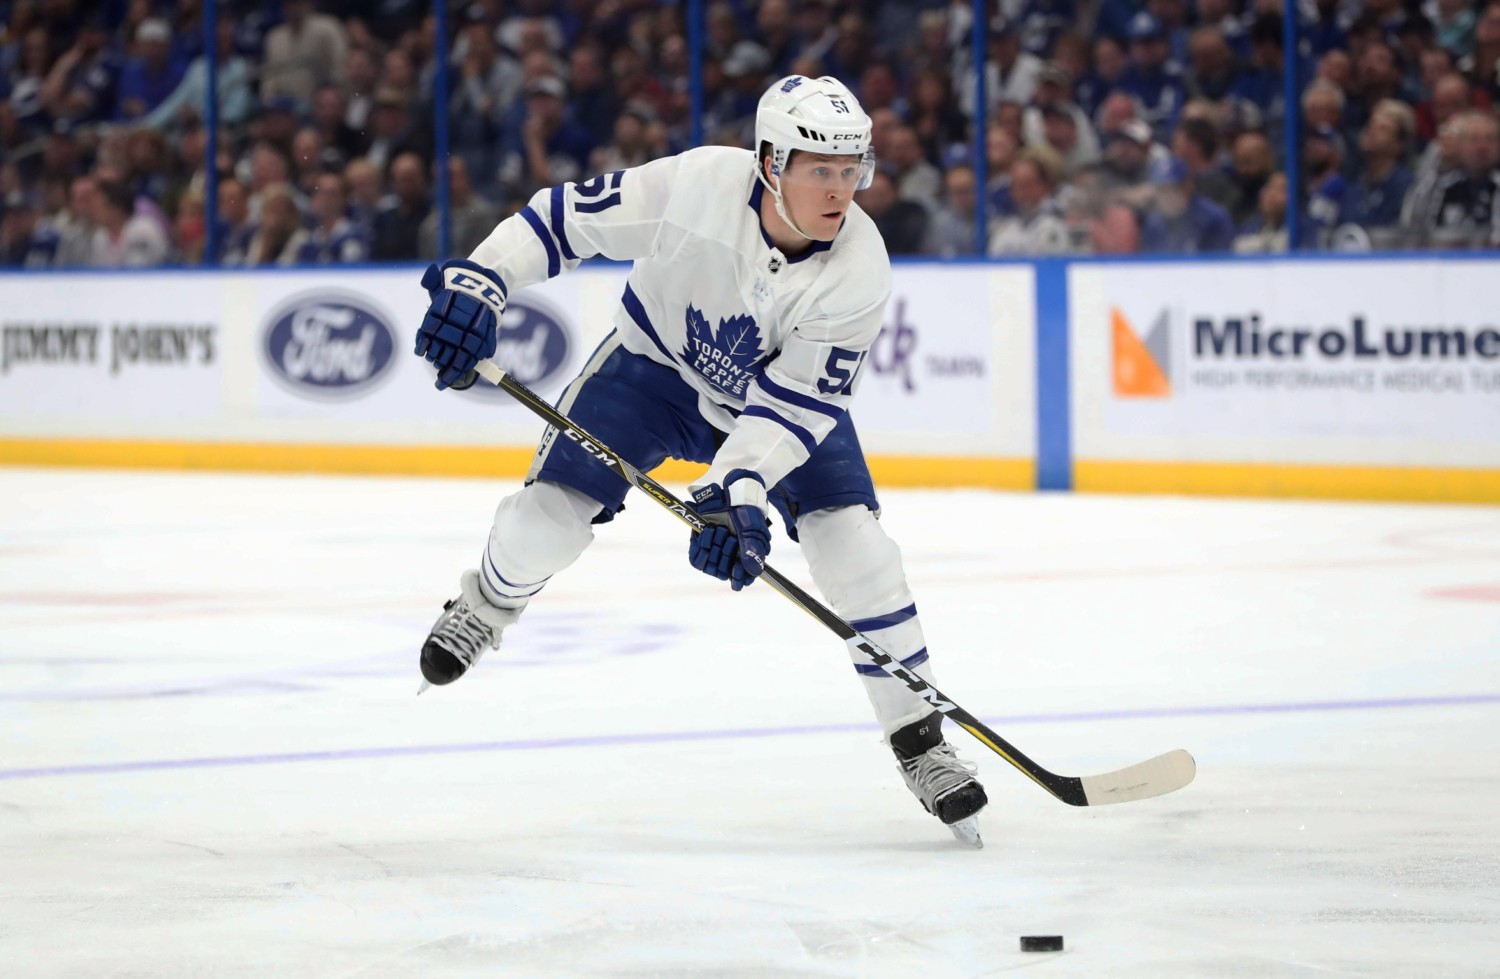 If the Toronto Maple Leafs could get Jake Gardiner around $5 million, then maybe ....